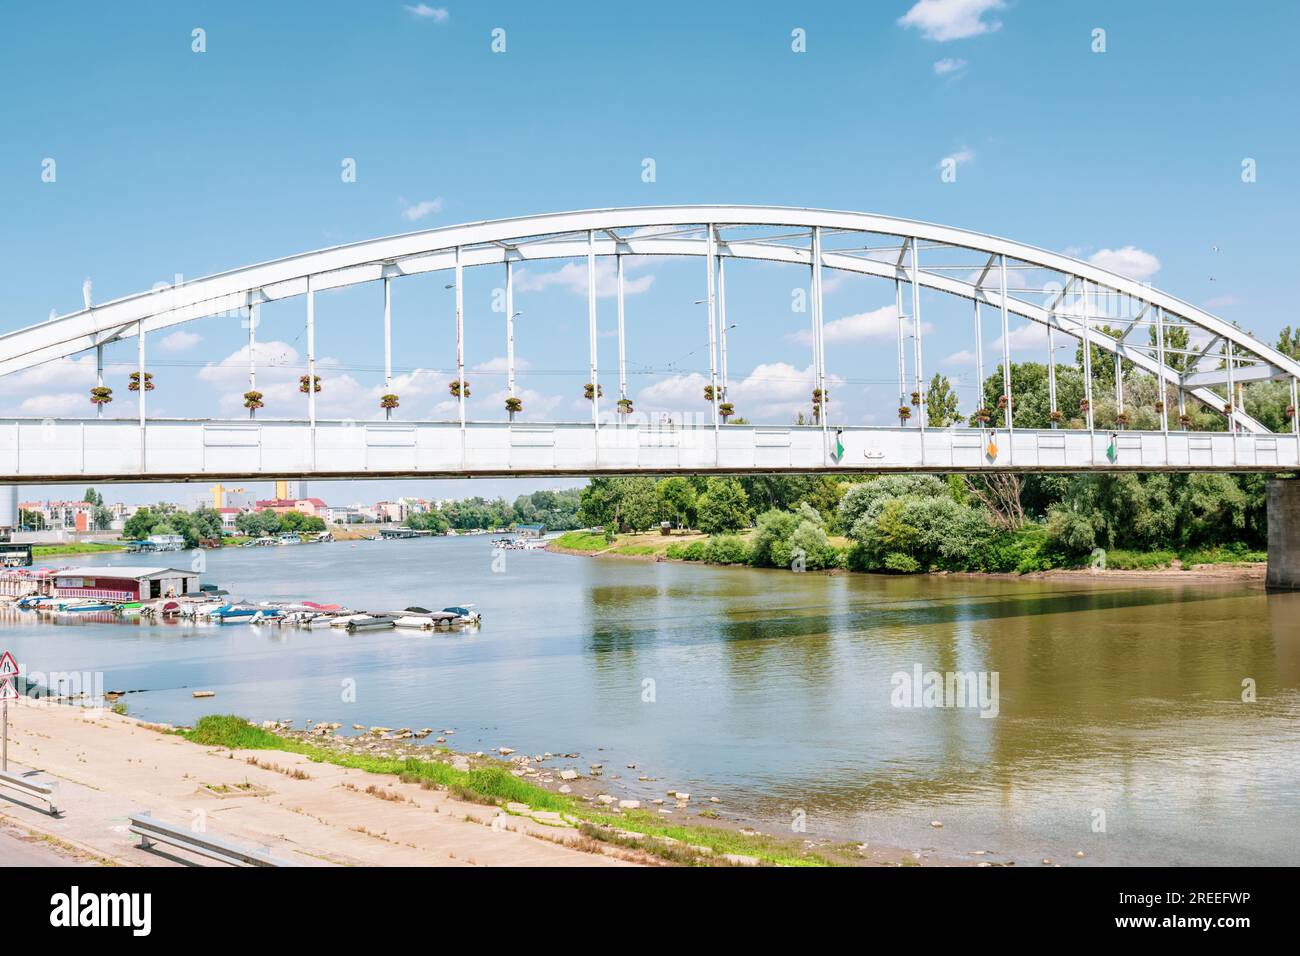 The Belvárosi Bridge in Szeged, Hungary,is the main bridge of the city, connecting Újszeged,on the left bank of the river Tisza,to the other quarters. Stock Photo